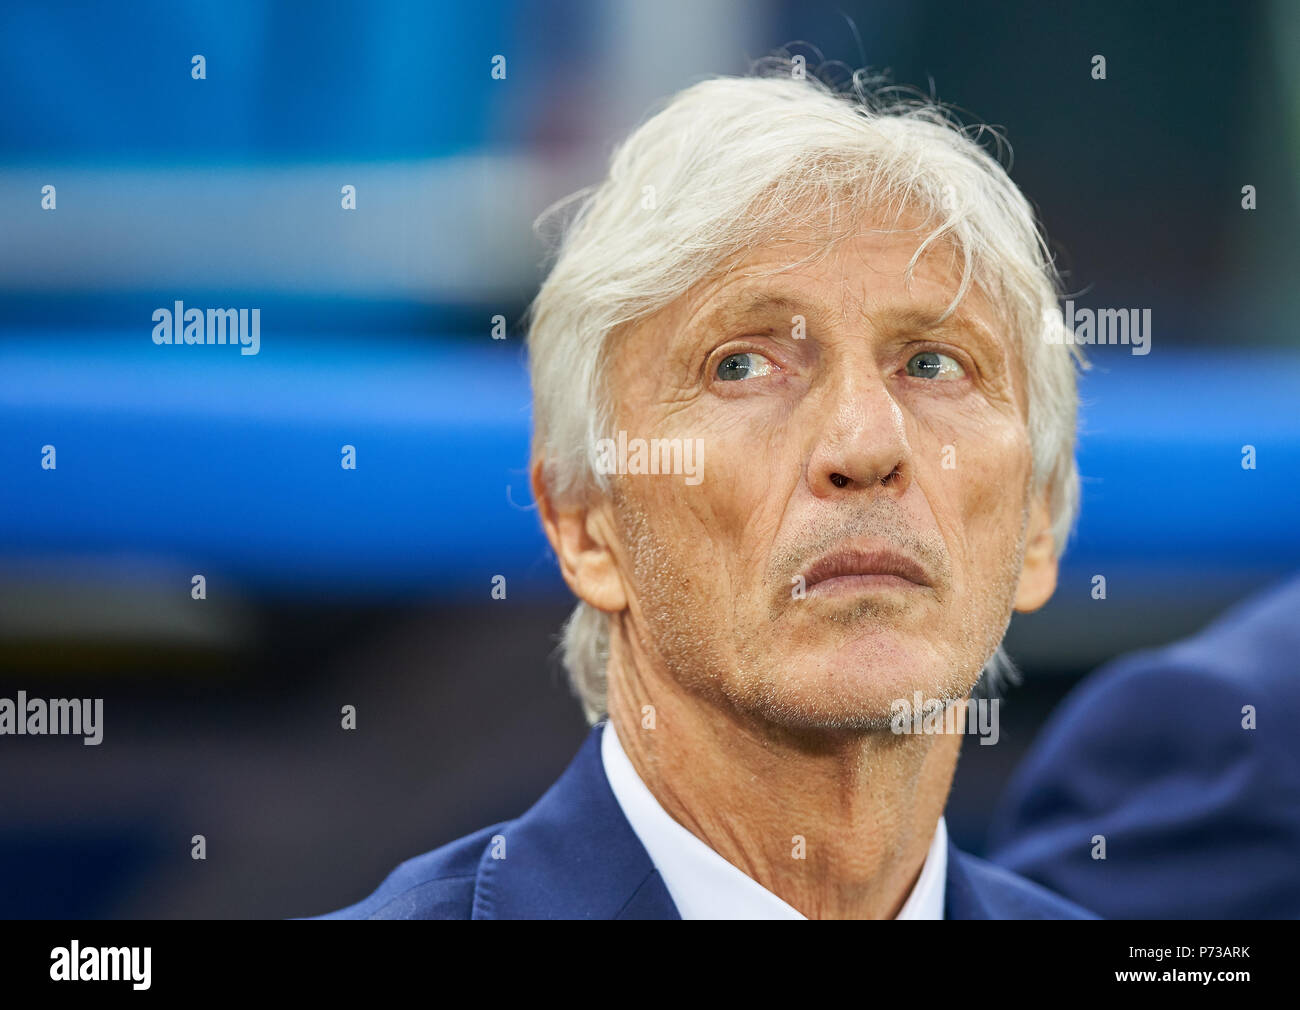 England- Columbia, Soccer, Moscow, July 03, 2018 Jose PEKERMAN, ARG, Columbia headcoach,  half-size, portrait,  ENGLAND - COLUMBIA 1-1, 4-3 after penalty shoot-out FIFA WORLD CUP 2018 RUSSIA, Season 2018/2019,  July 03, 2018 S p a r t a k Stadium in Moscow, Russia. © Peter Schatz / Alamy Live News Stock Photo